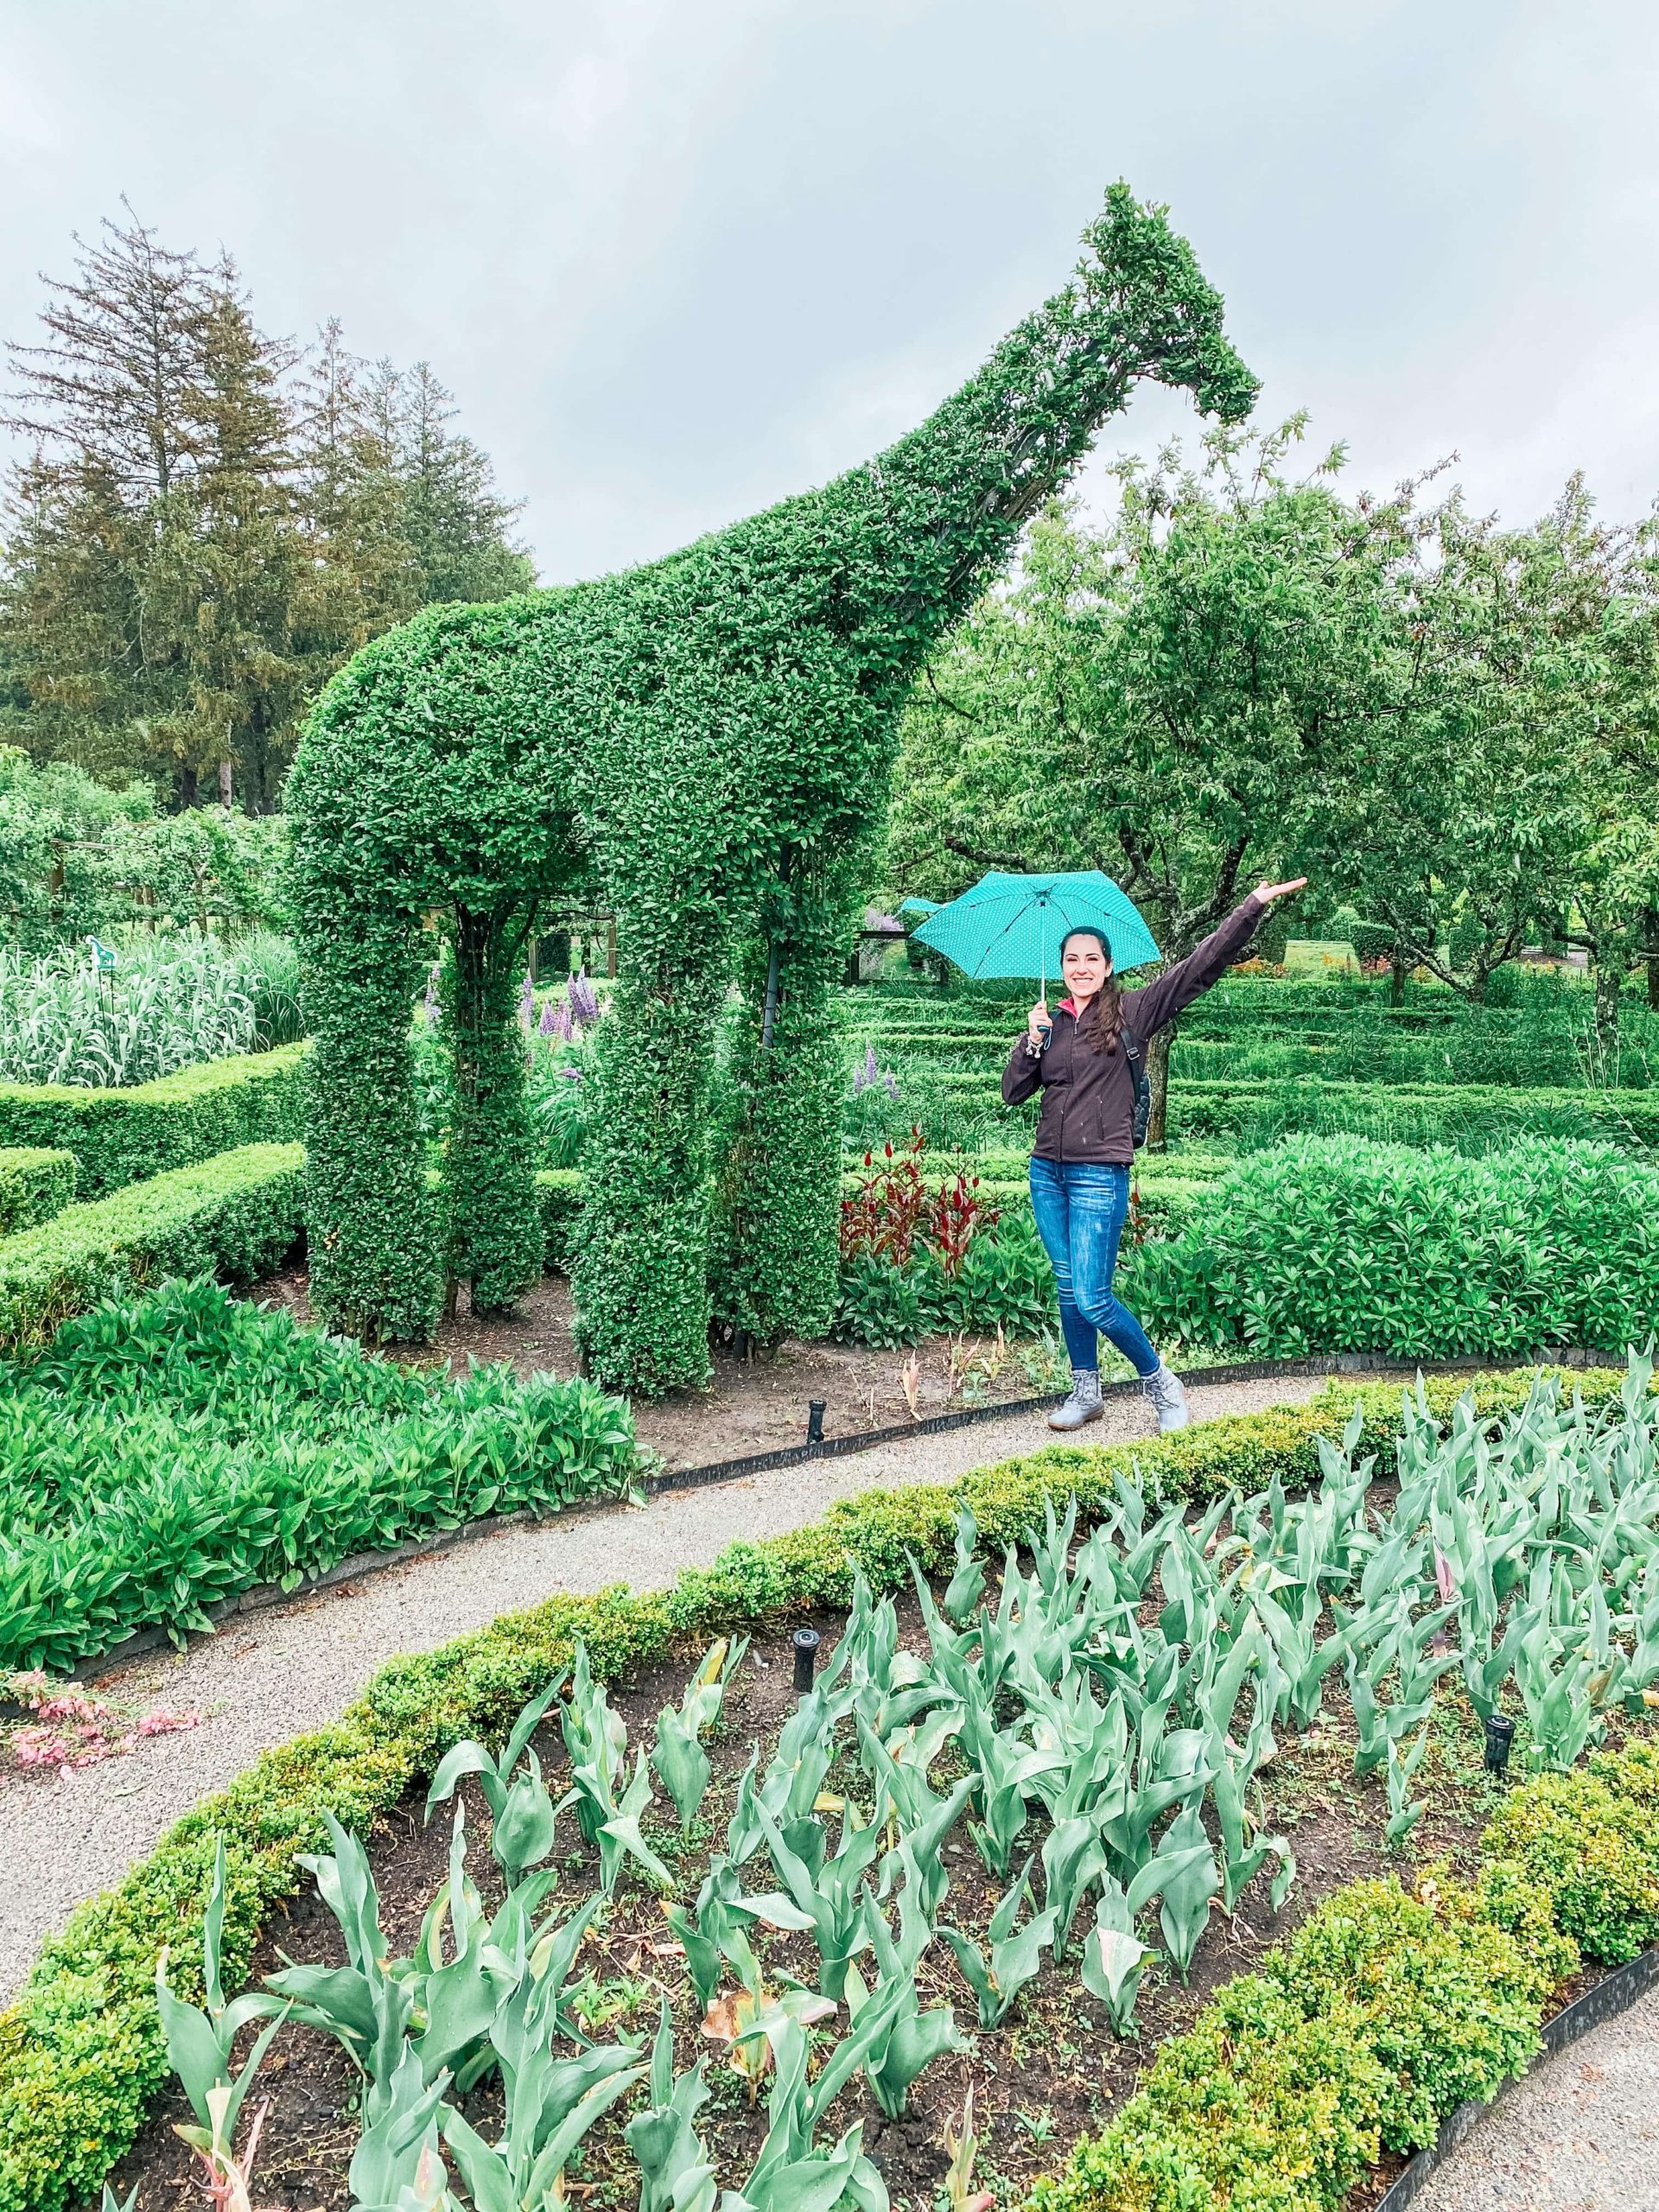 Creating Elegant Topiary Animals: A Guide to Craft Beautiful Green Art